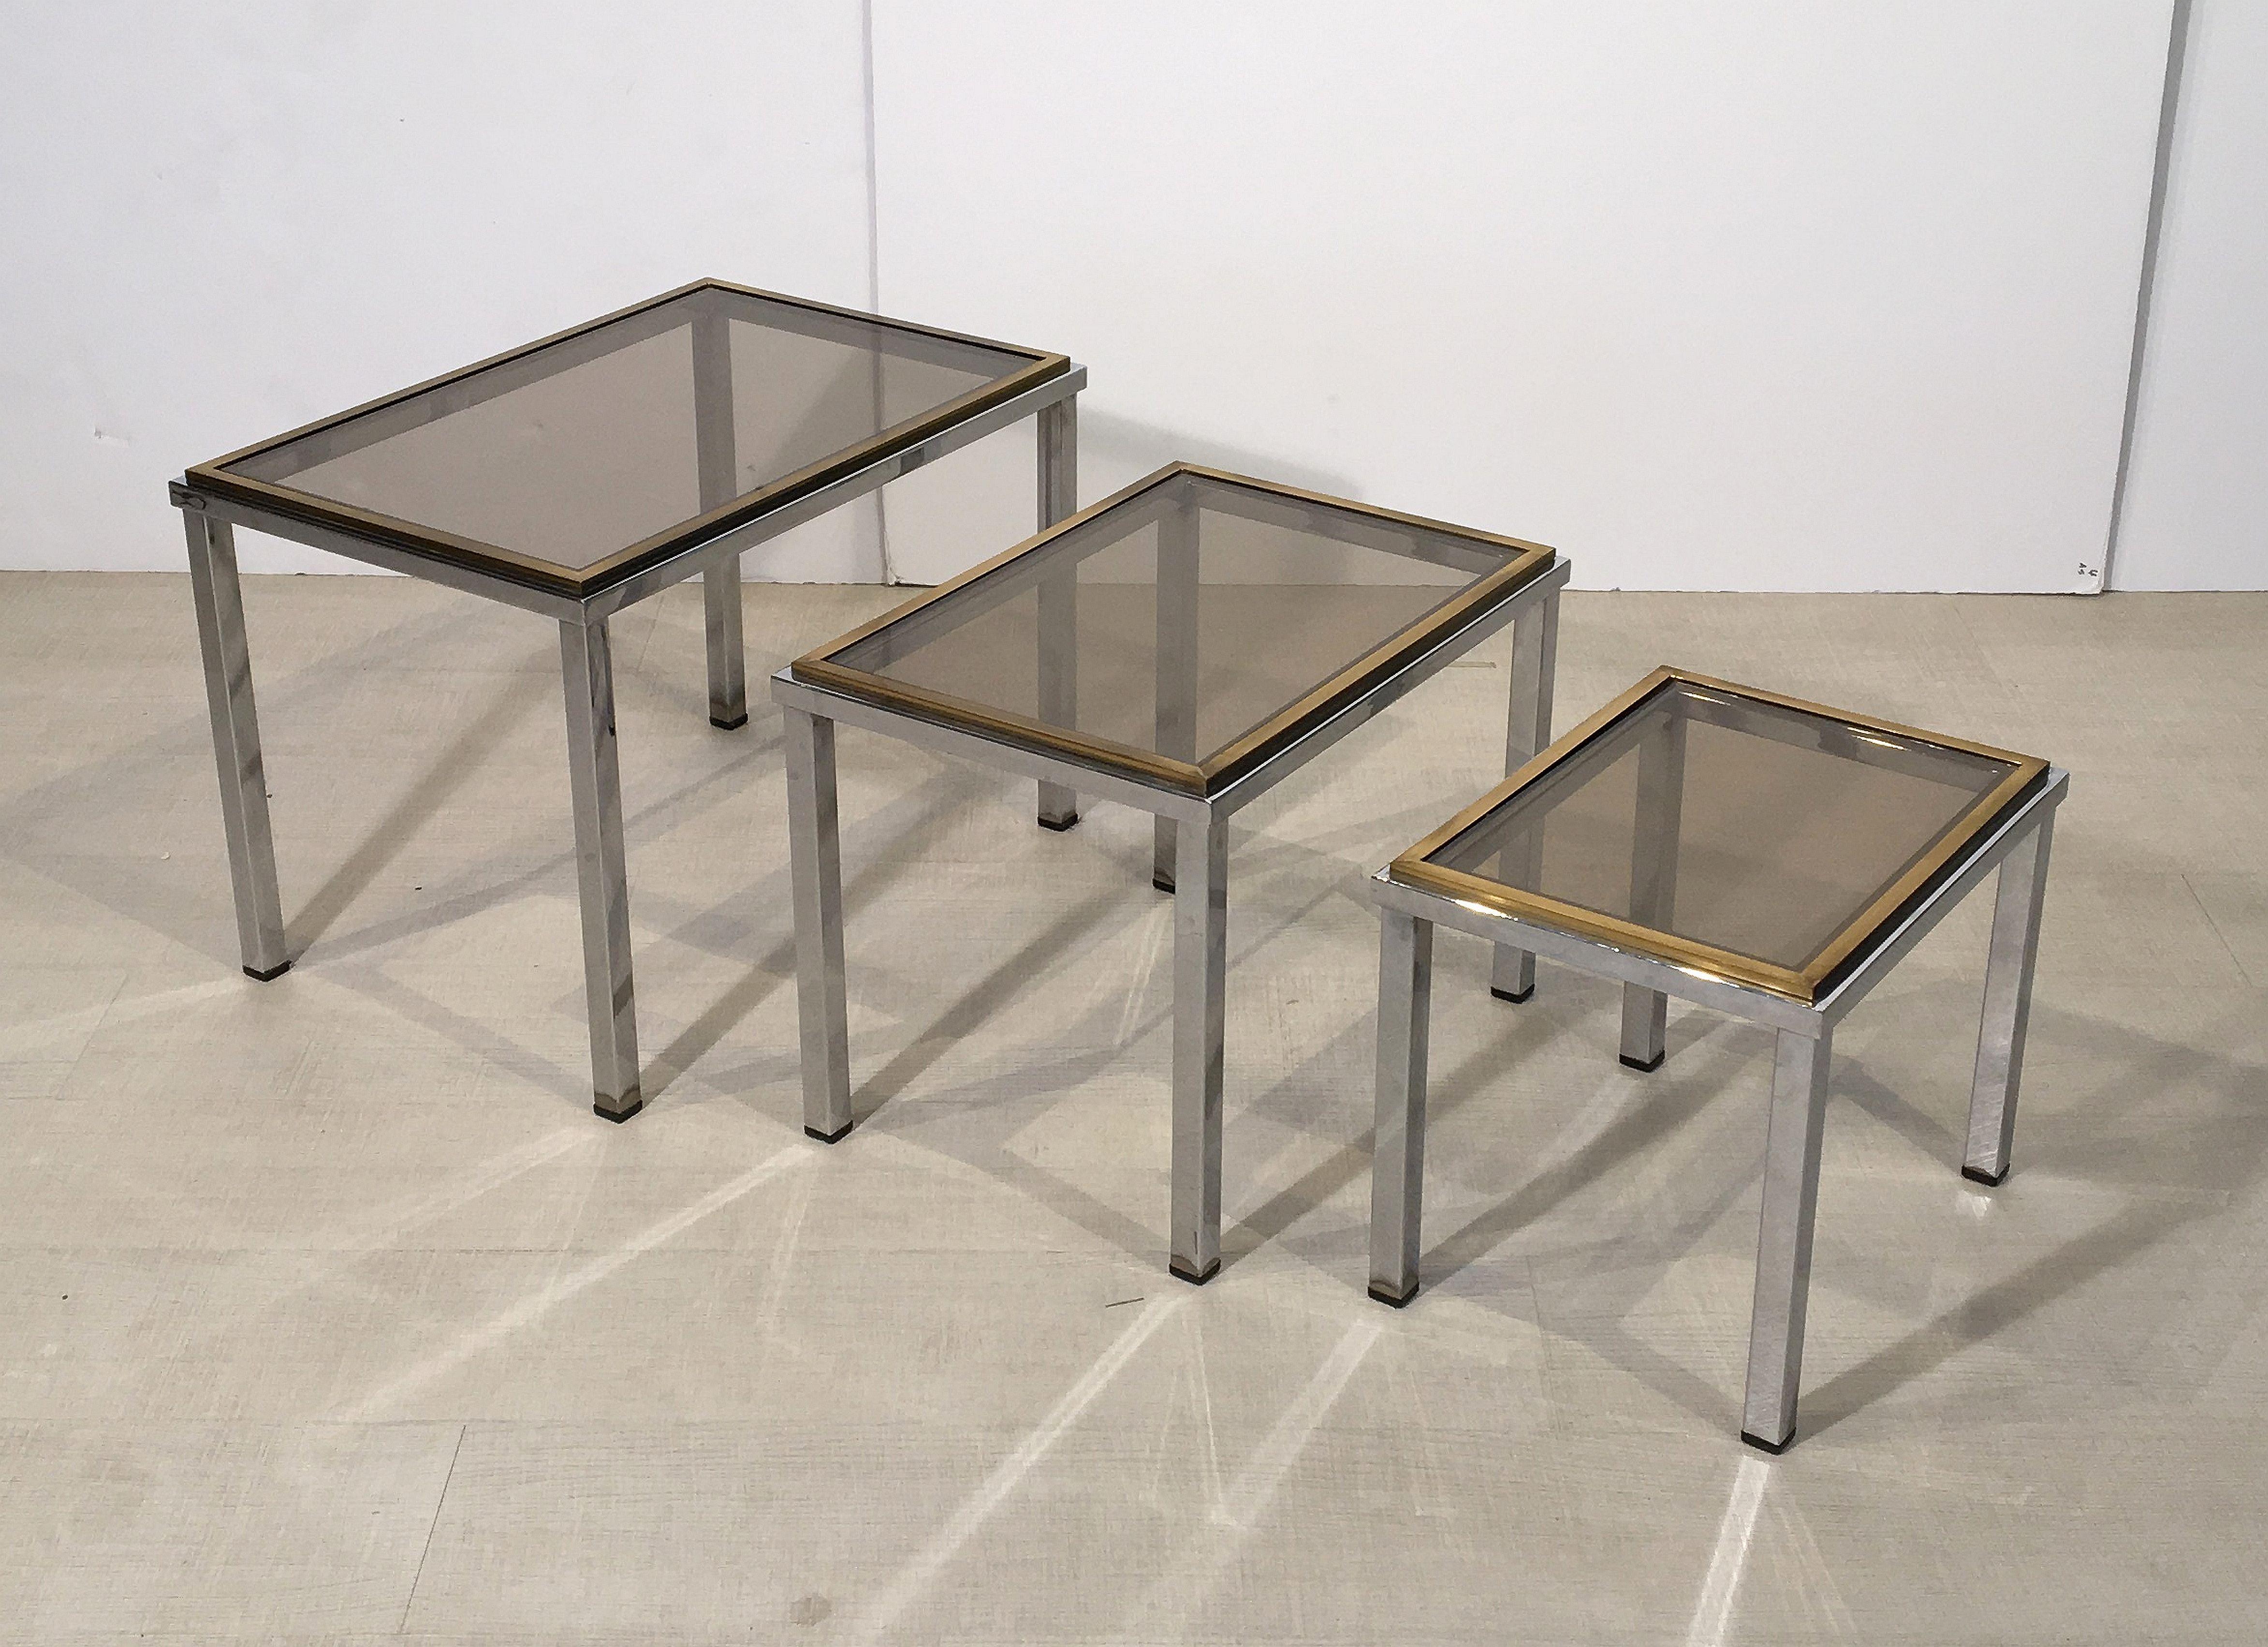 A fine set of French rectangular stacking or nesting low tables featuring three fitted tables, each with a design in brass and chrome with inset rectangular smoked glass top.

Great for use as cocktail or coffee tables as well.

Measures:
Large